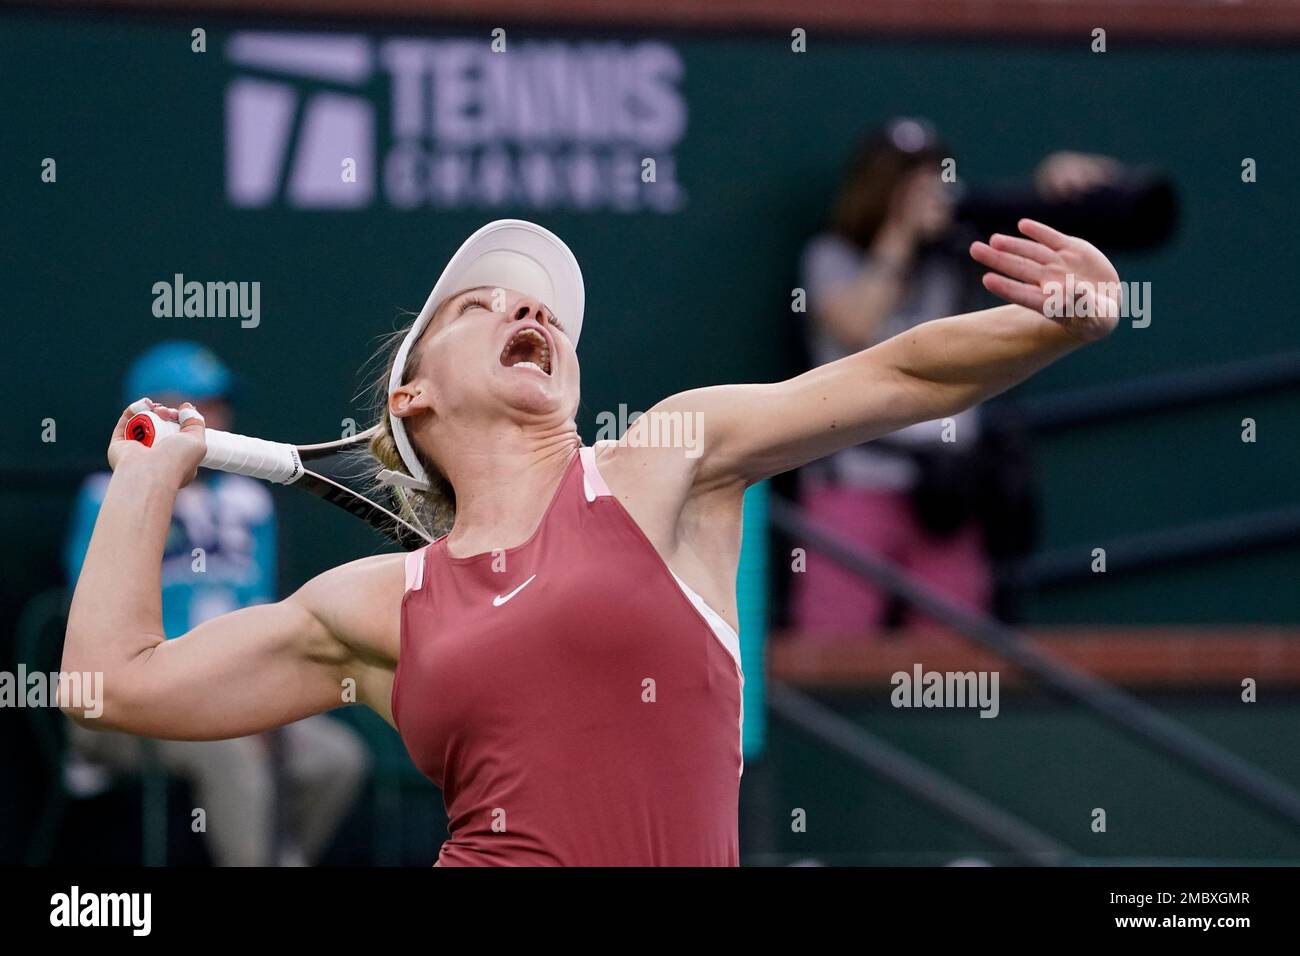 Simona Halep, of Romania, serves to Iga Swiatek, of Poland, during the womens singles semifinals at the BNP Paribas Open tennis tournament Friday, March 18, 2022, in Indian Wells, Calif